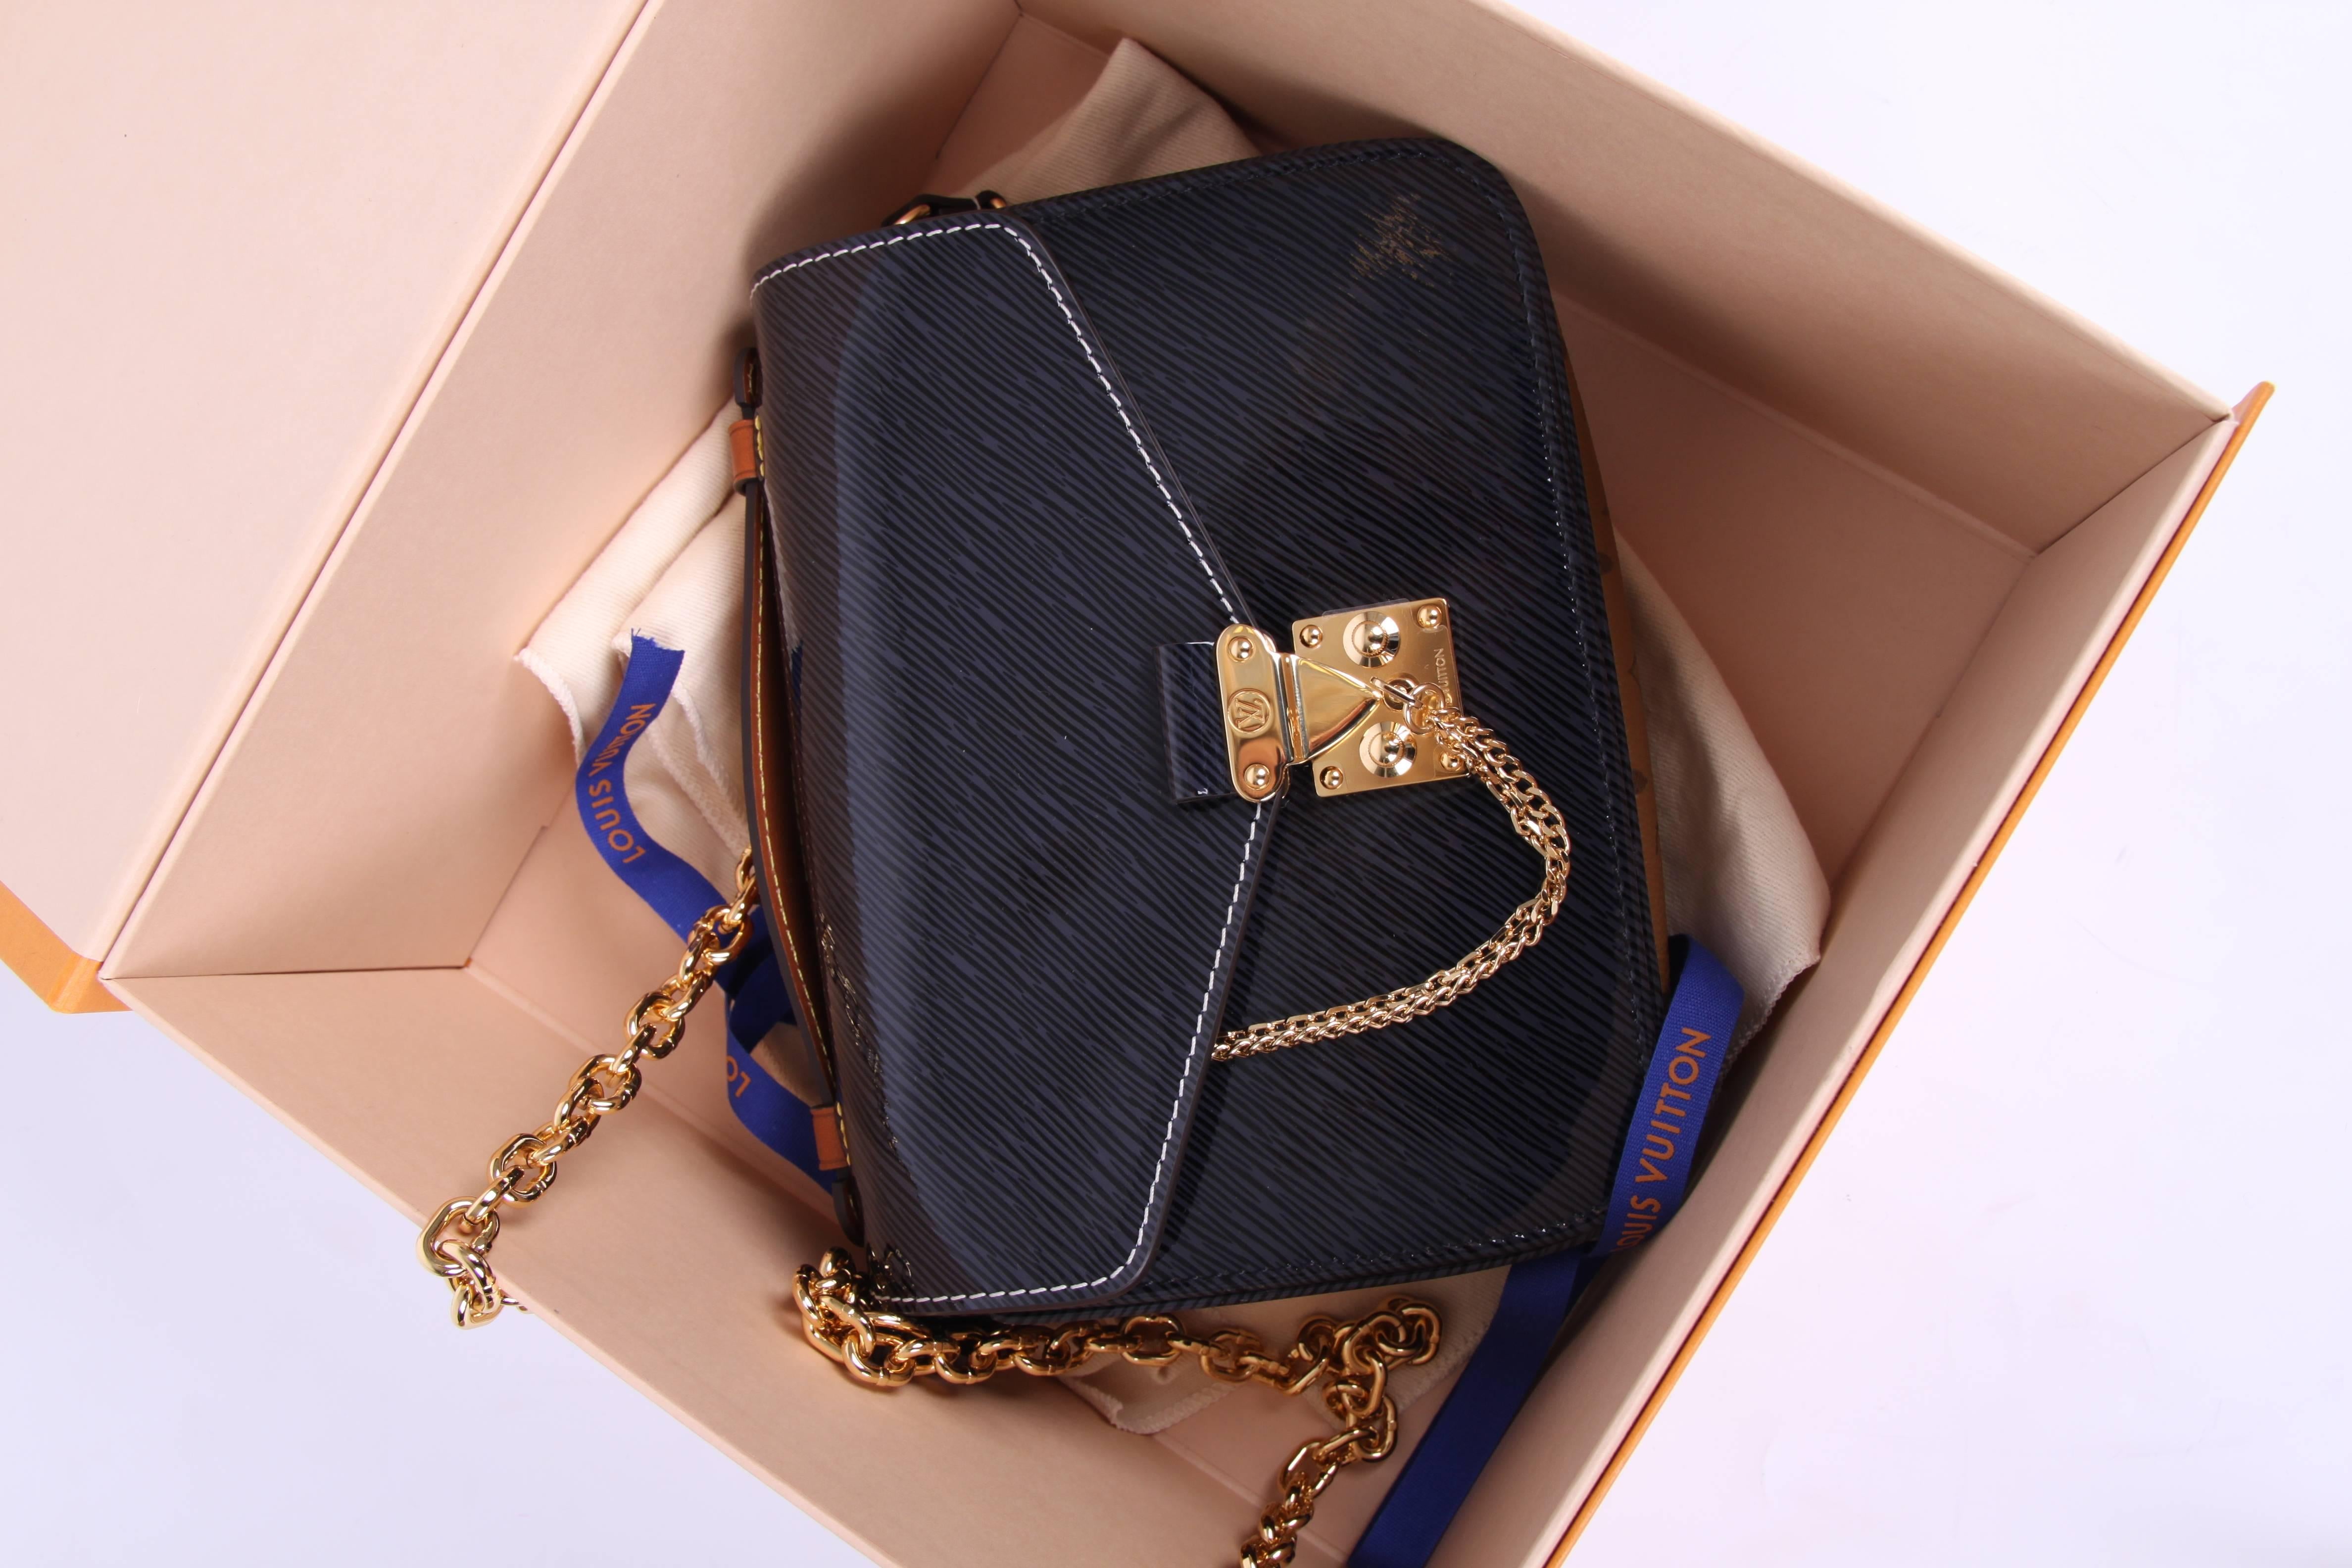 This is the Louis Vuitton Métis Mini, the lastest version from the fall/winter collection of 2017 in dark blue epi patent leather. Neat!!

The front, back and flap are crafted of dark blue epi patent leather. On top a natural coloured handle with a